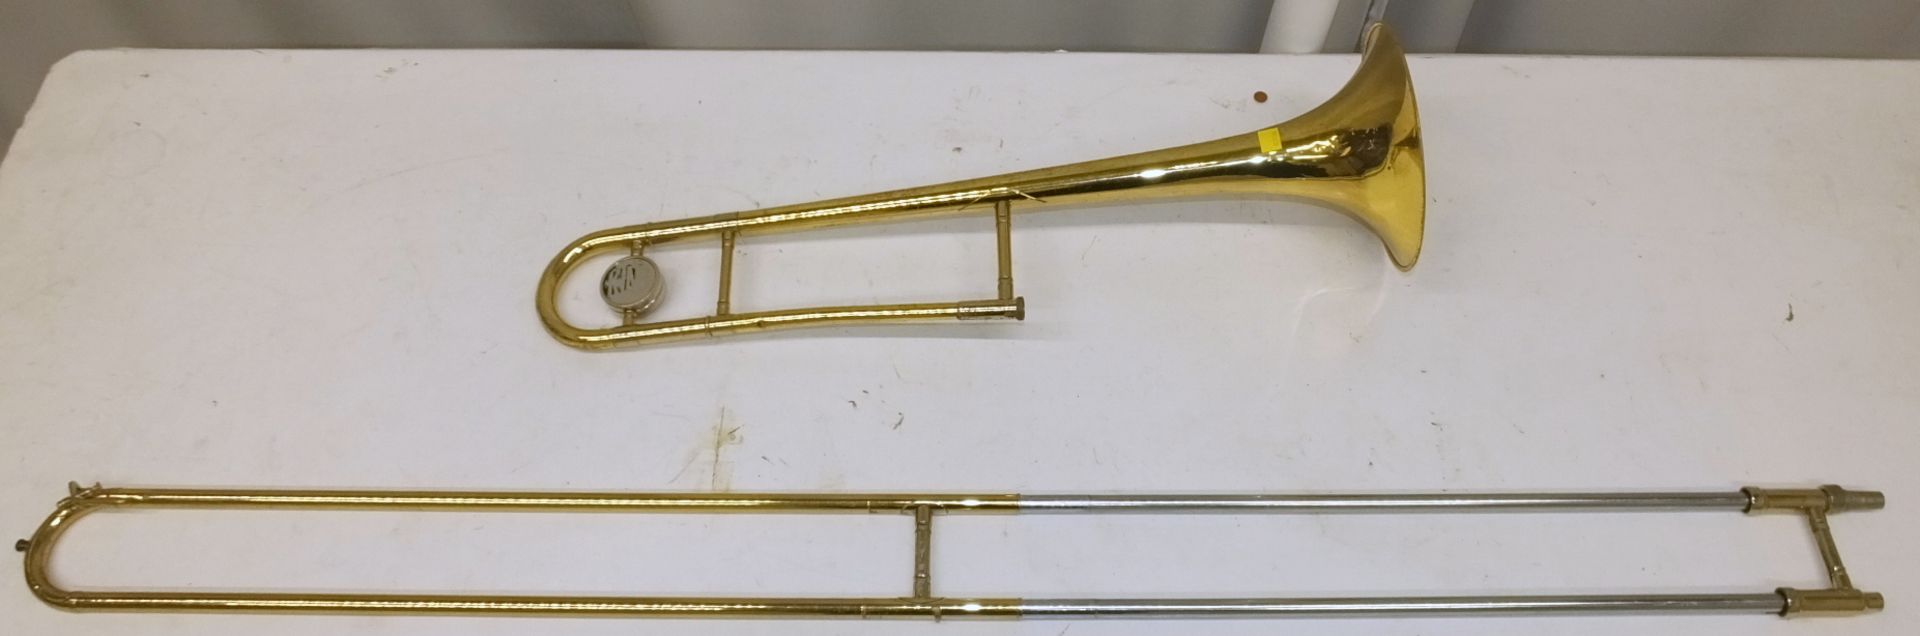 King Trombone in case - Serial Number - 108606 - A4984 (dents on instrument) - Image 5 of 16